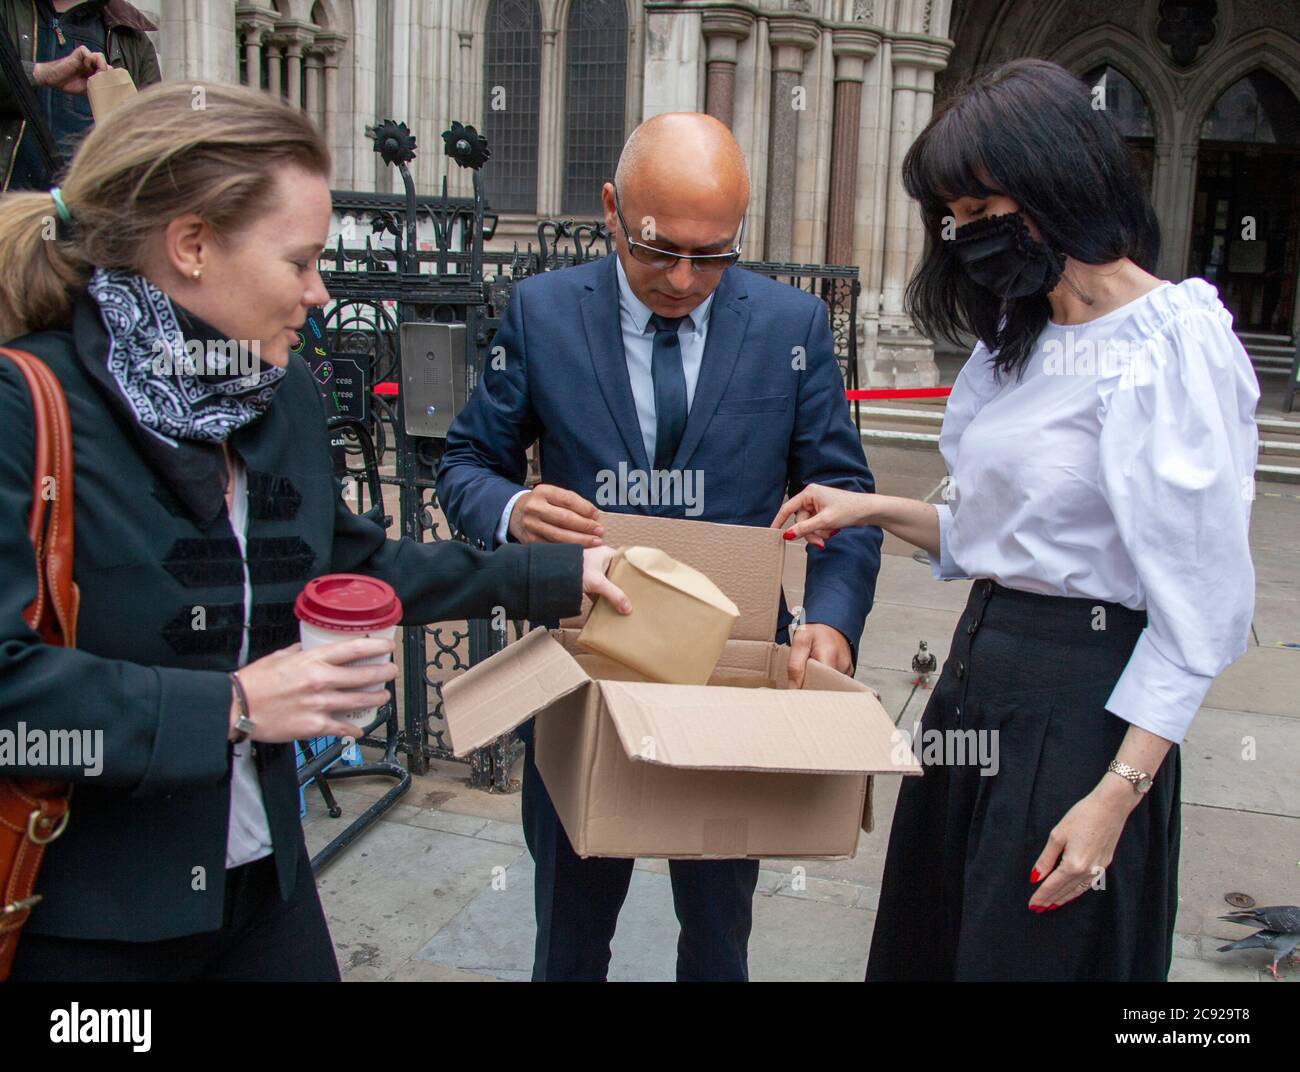 London, UK. 28th July 2020. Johnny Depp’s team bring a boxful of signed souvenirs to distribute amongst his fans on his last day (16) of his libel trial against The Sun's publishers NGN. Credit: Neil Atkinson/Alamy Live News Stock Photo